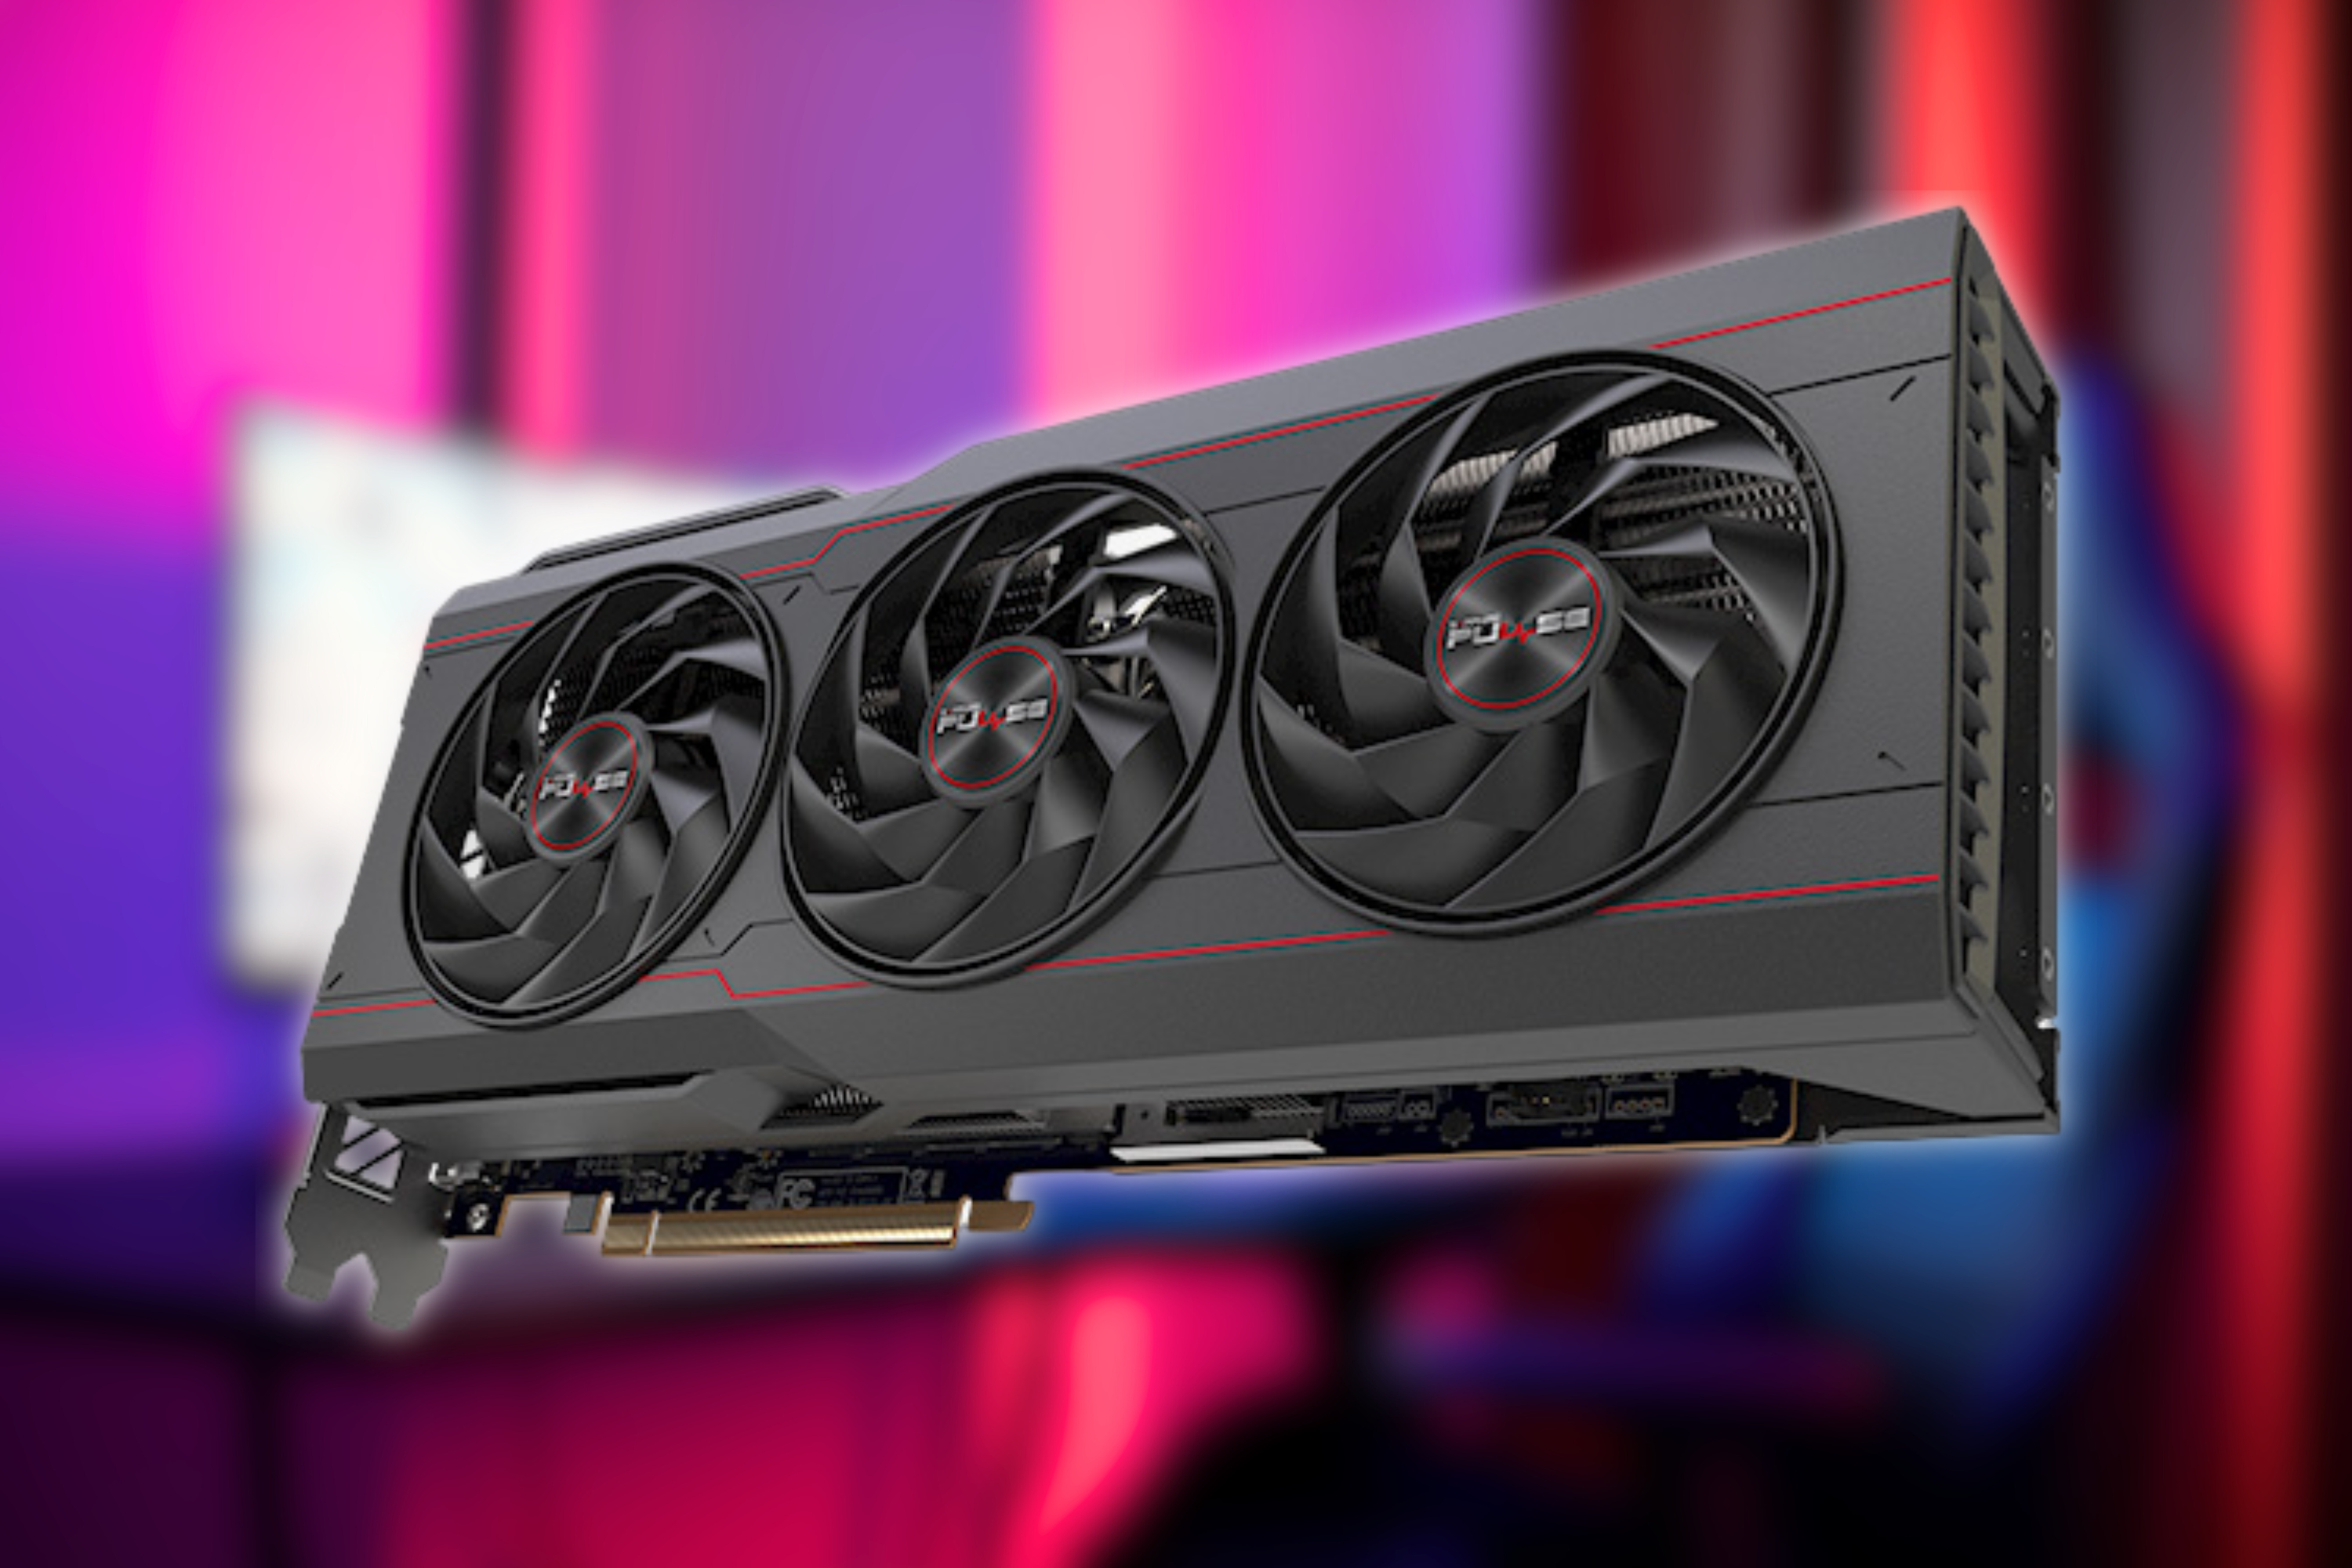 Sapphire Pulse AMD Radeon RX 7900 XT Gaming Graphics Card on blurred background